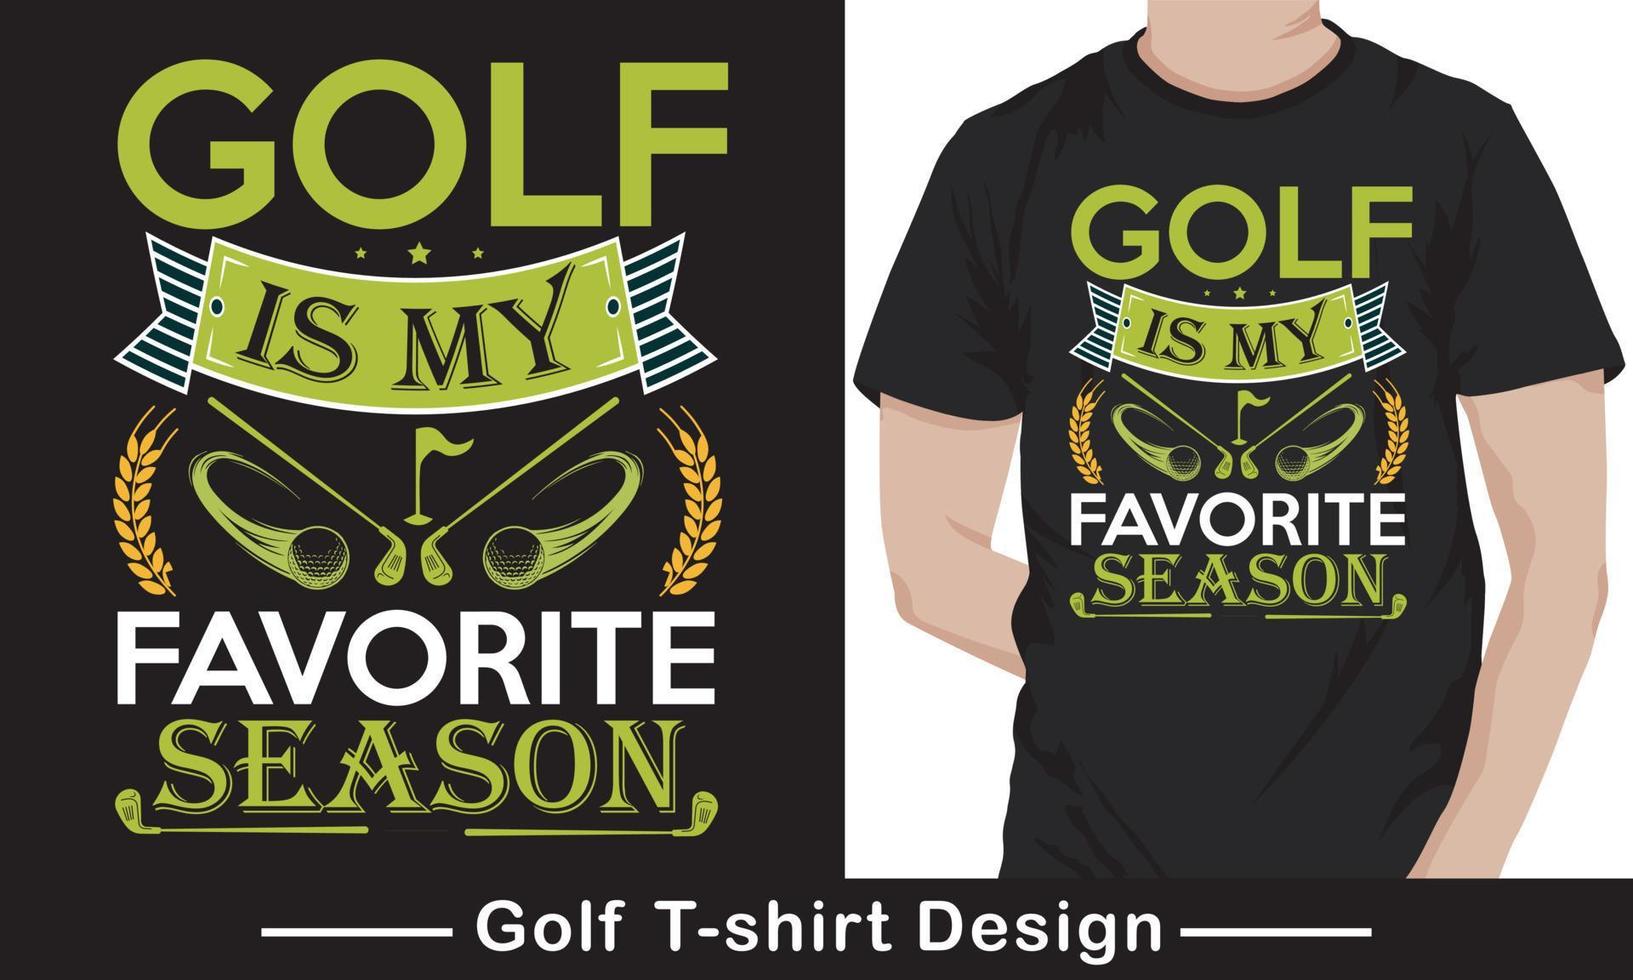 Golf T-shirt Design Graphic Template Free Vector